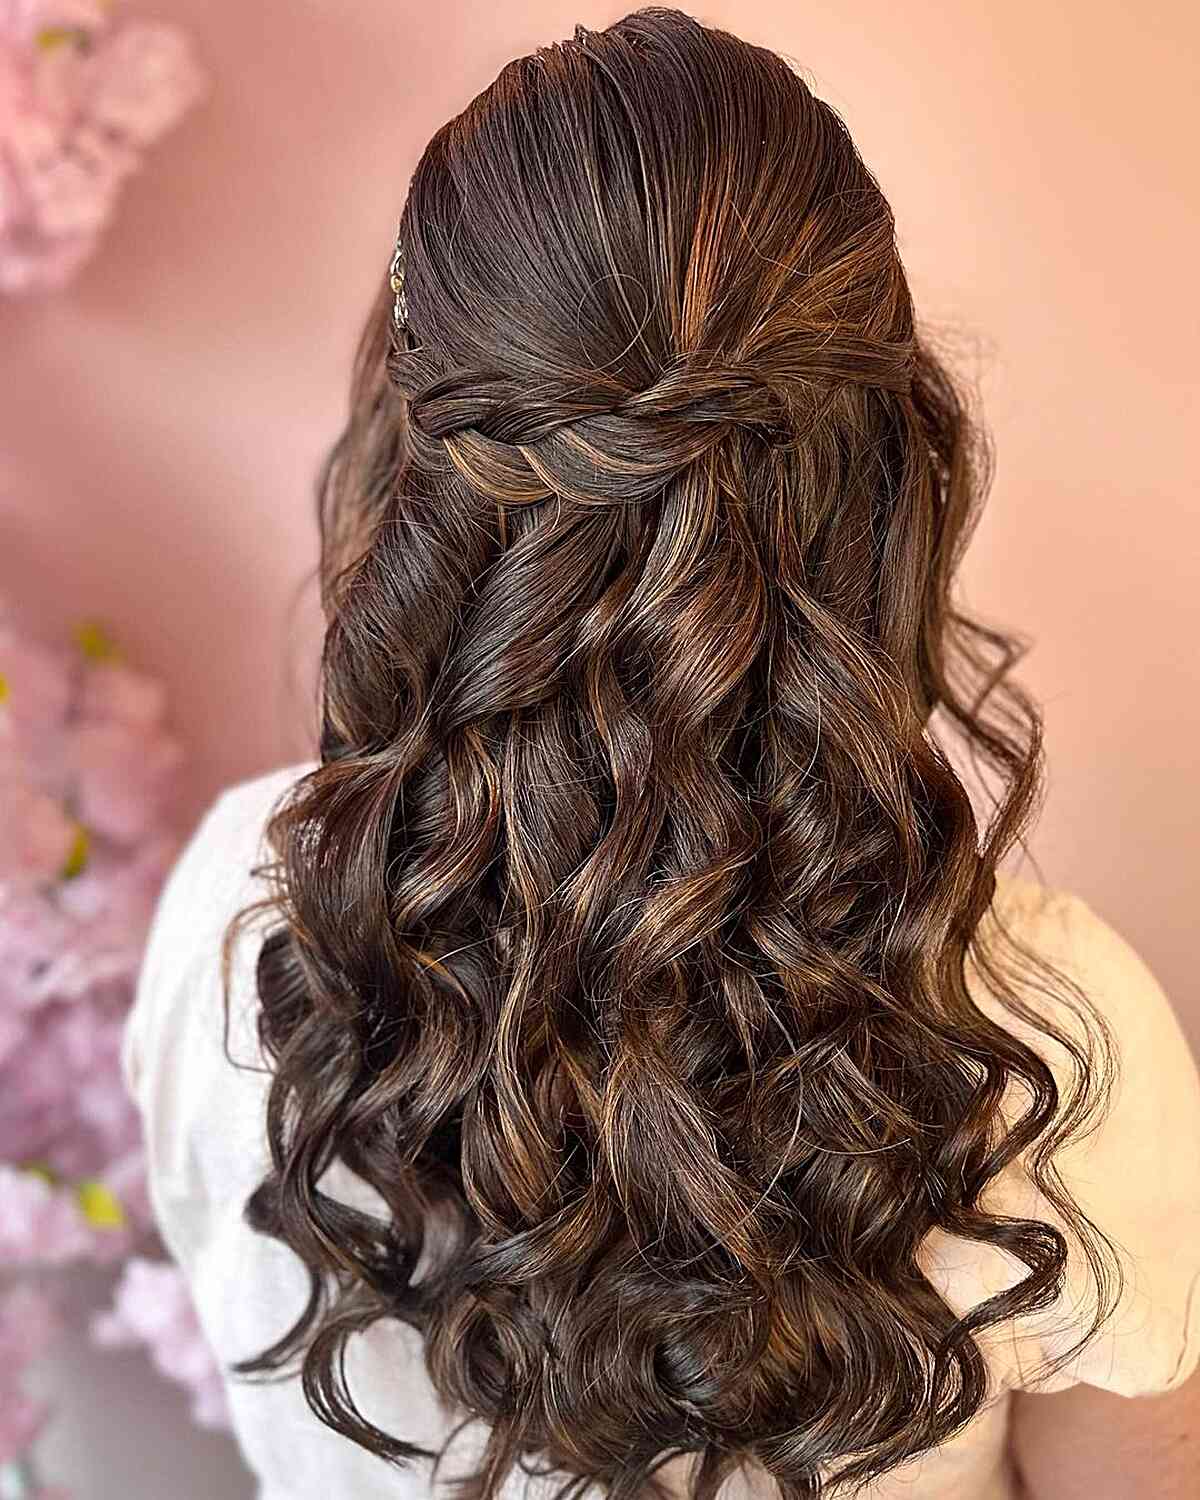 Long Braided Half Up with Voluminous Waves as wedding guest hairstyle